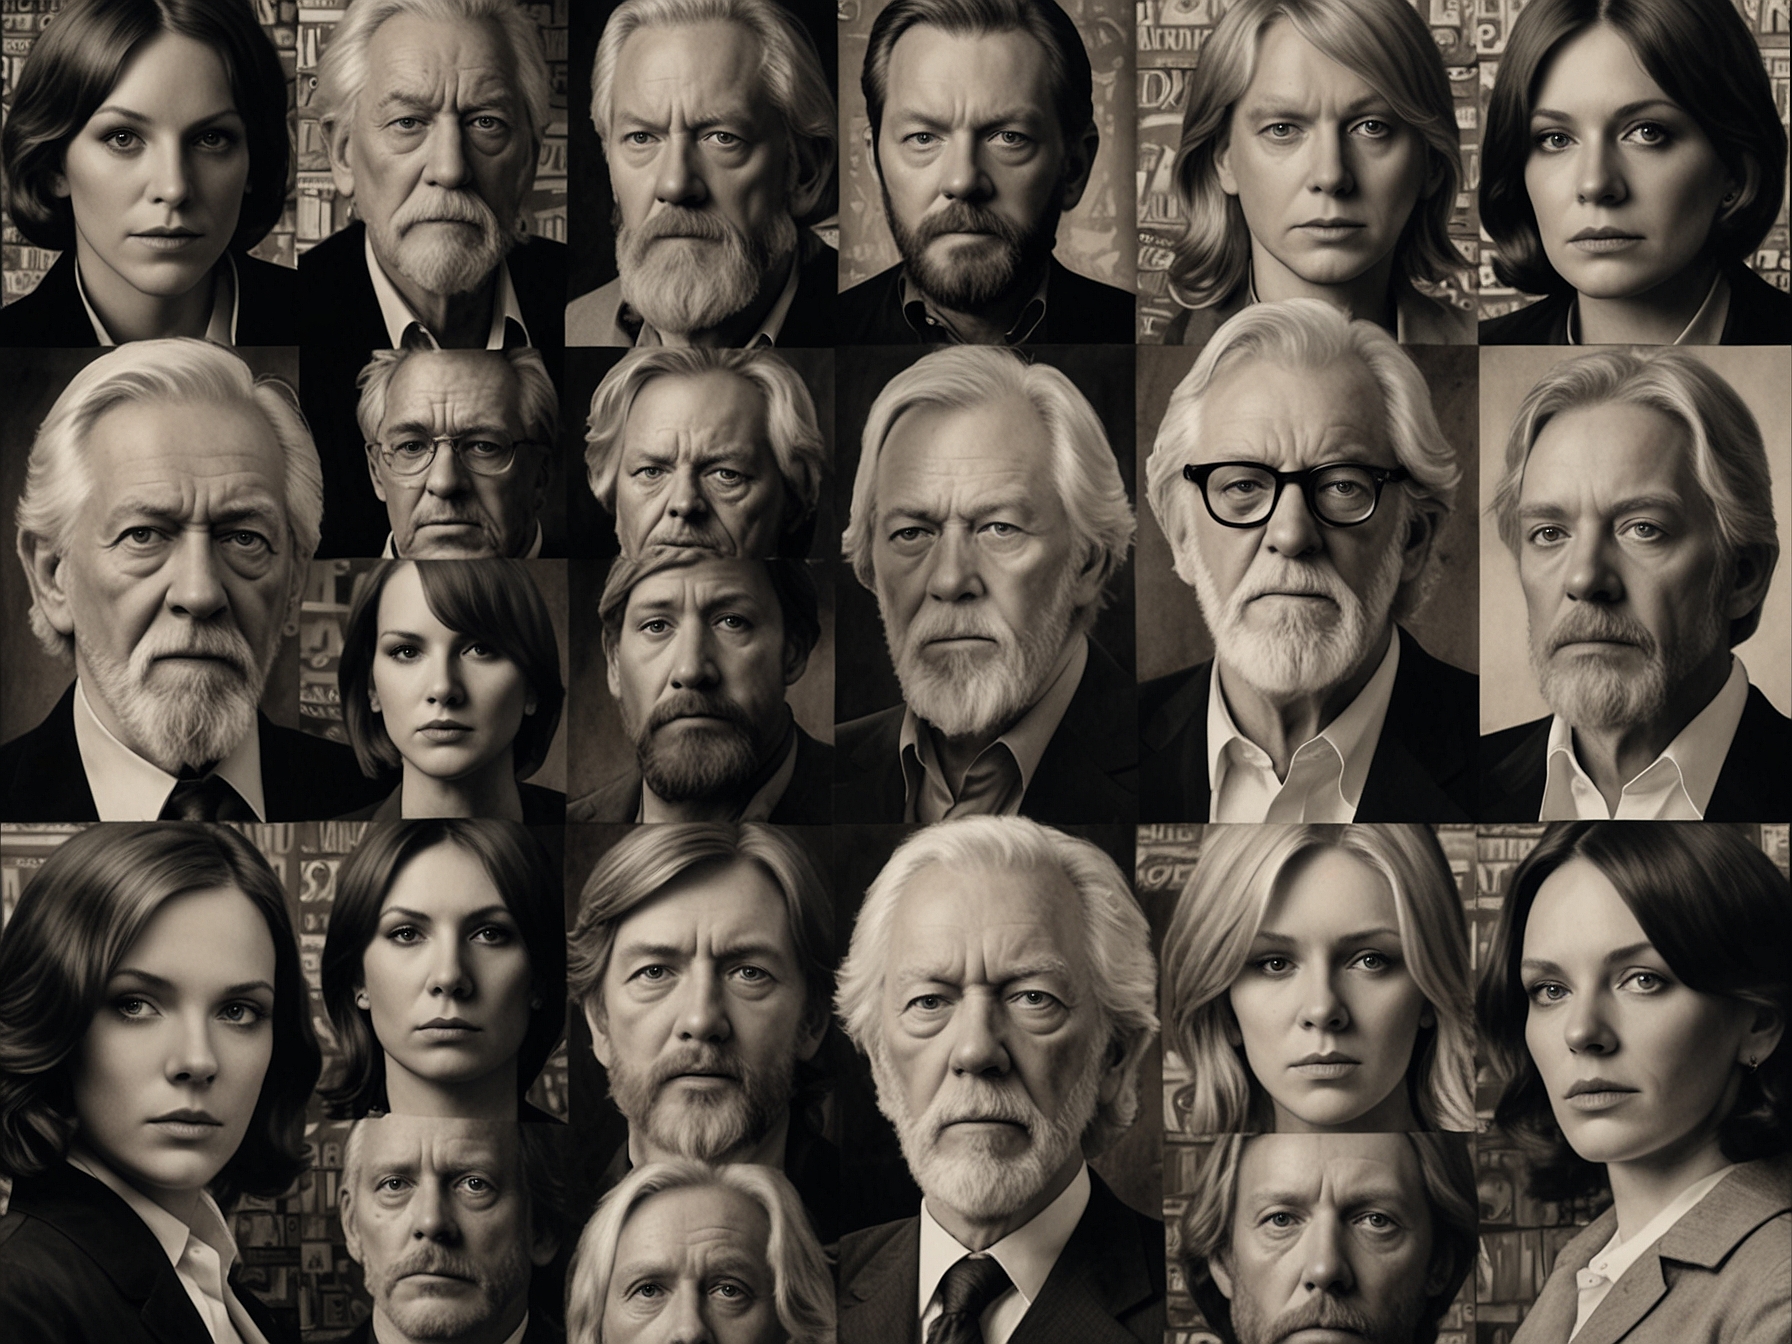 A collage featuring iconic roles of Donald Sutherland, including his standout performances in films like 'Klute', 'Ordinary People', and 'The Hunger Games'.